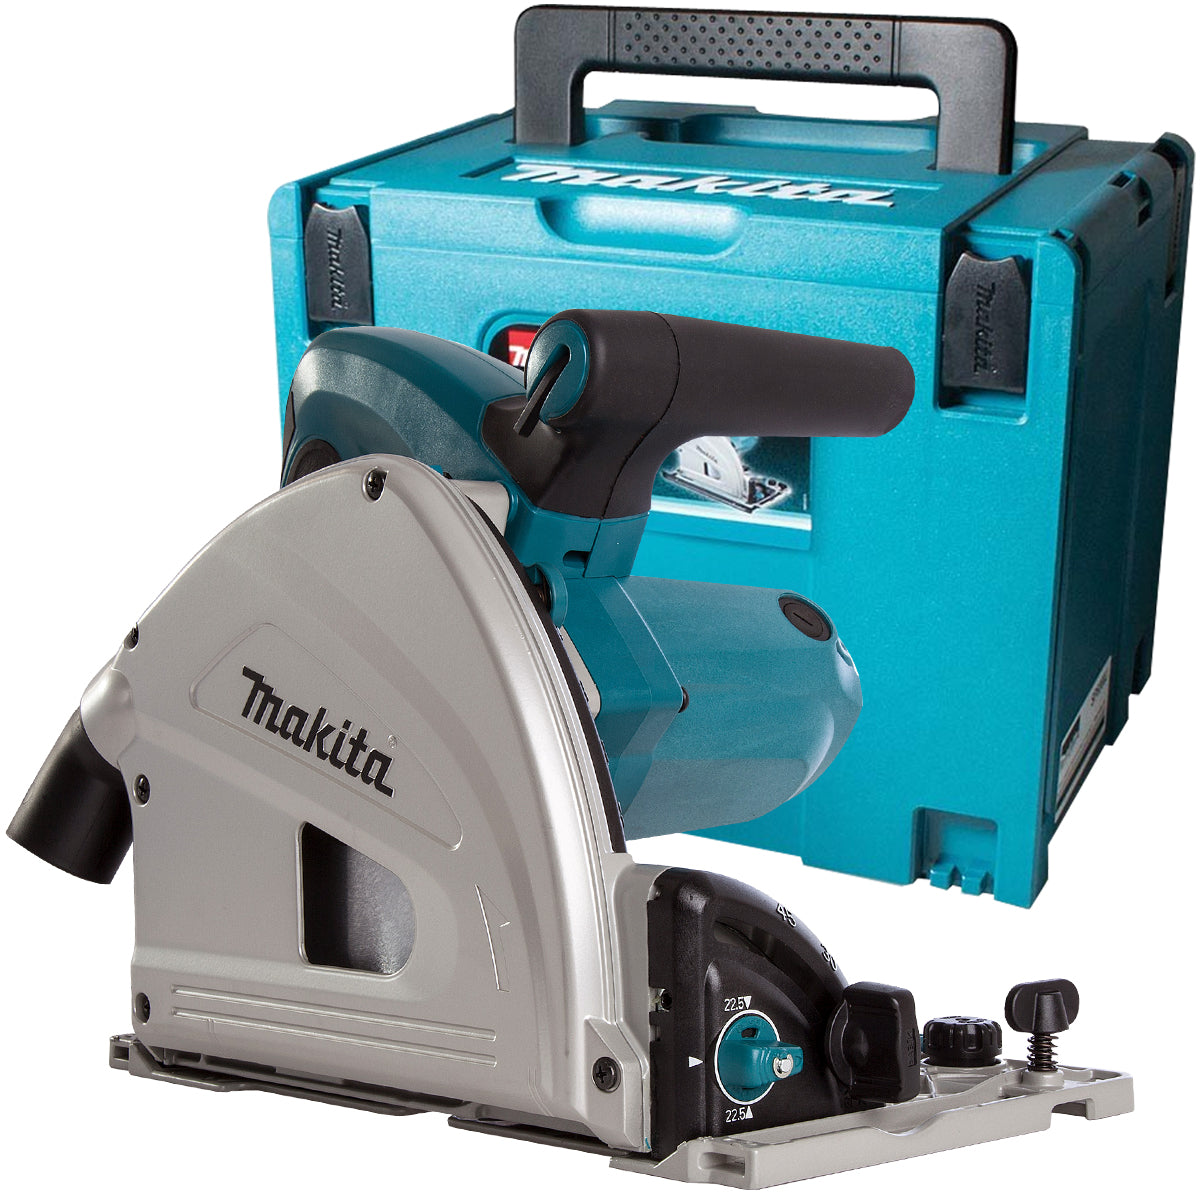 Makita SP6000J1/1 110V 165mm Plunge Saw with 2 x Rails, Connector Bar, Clamp & Bag